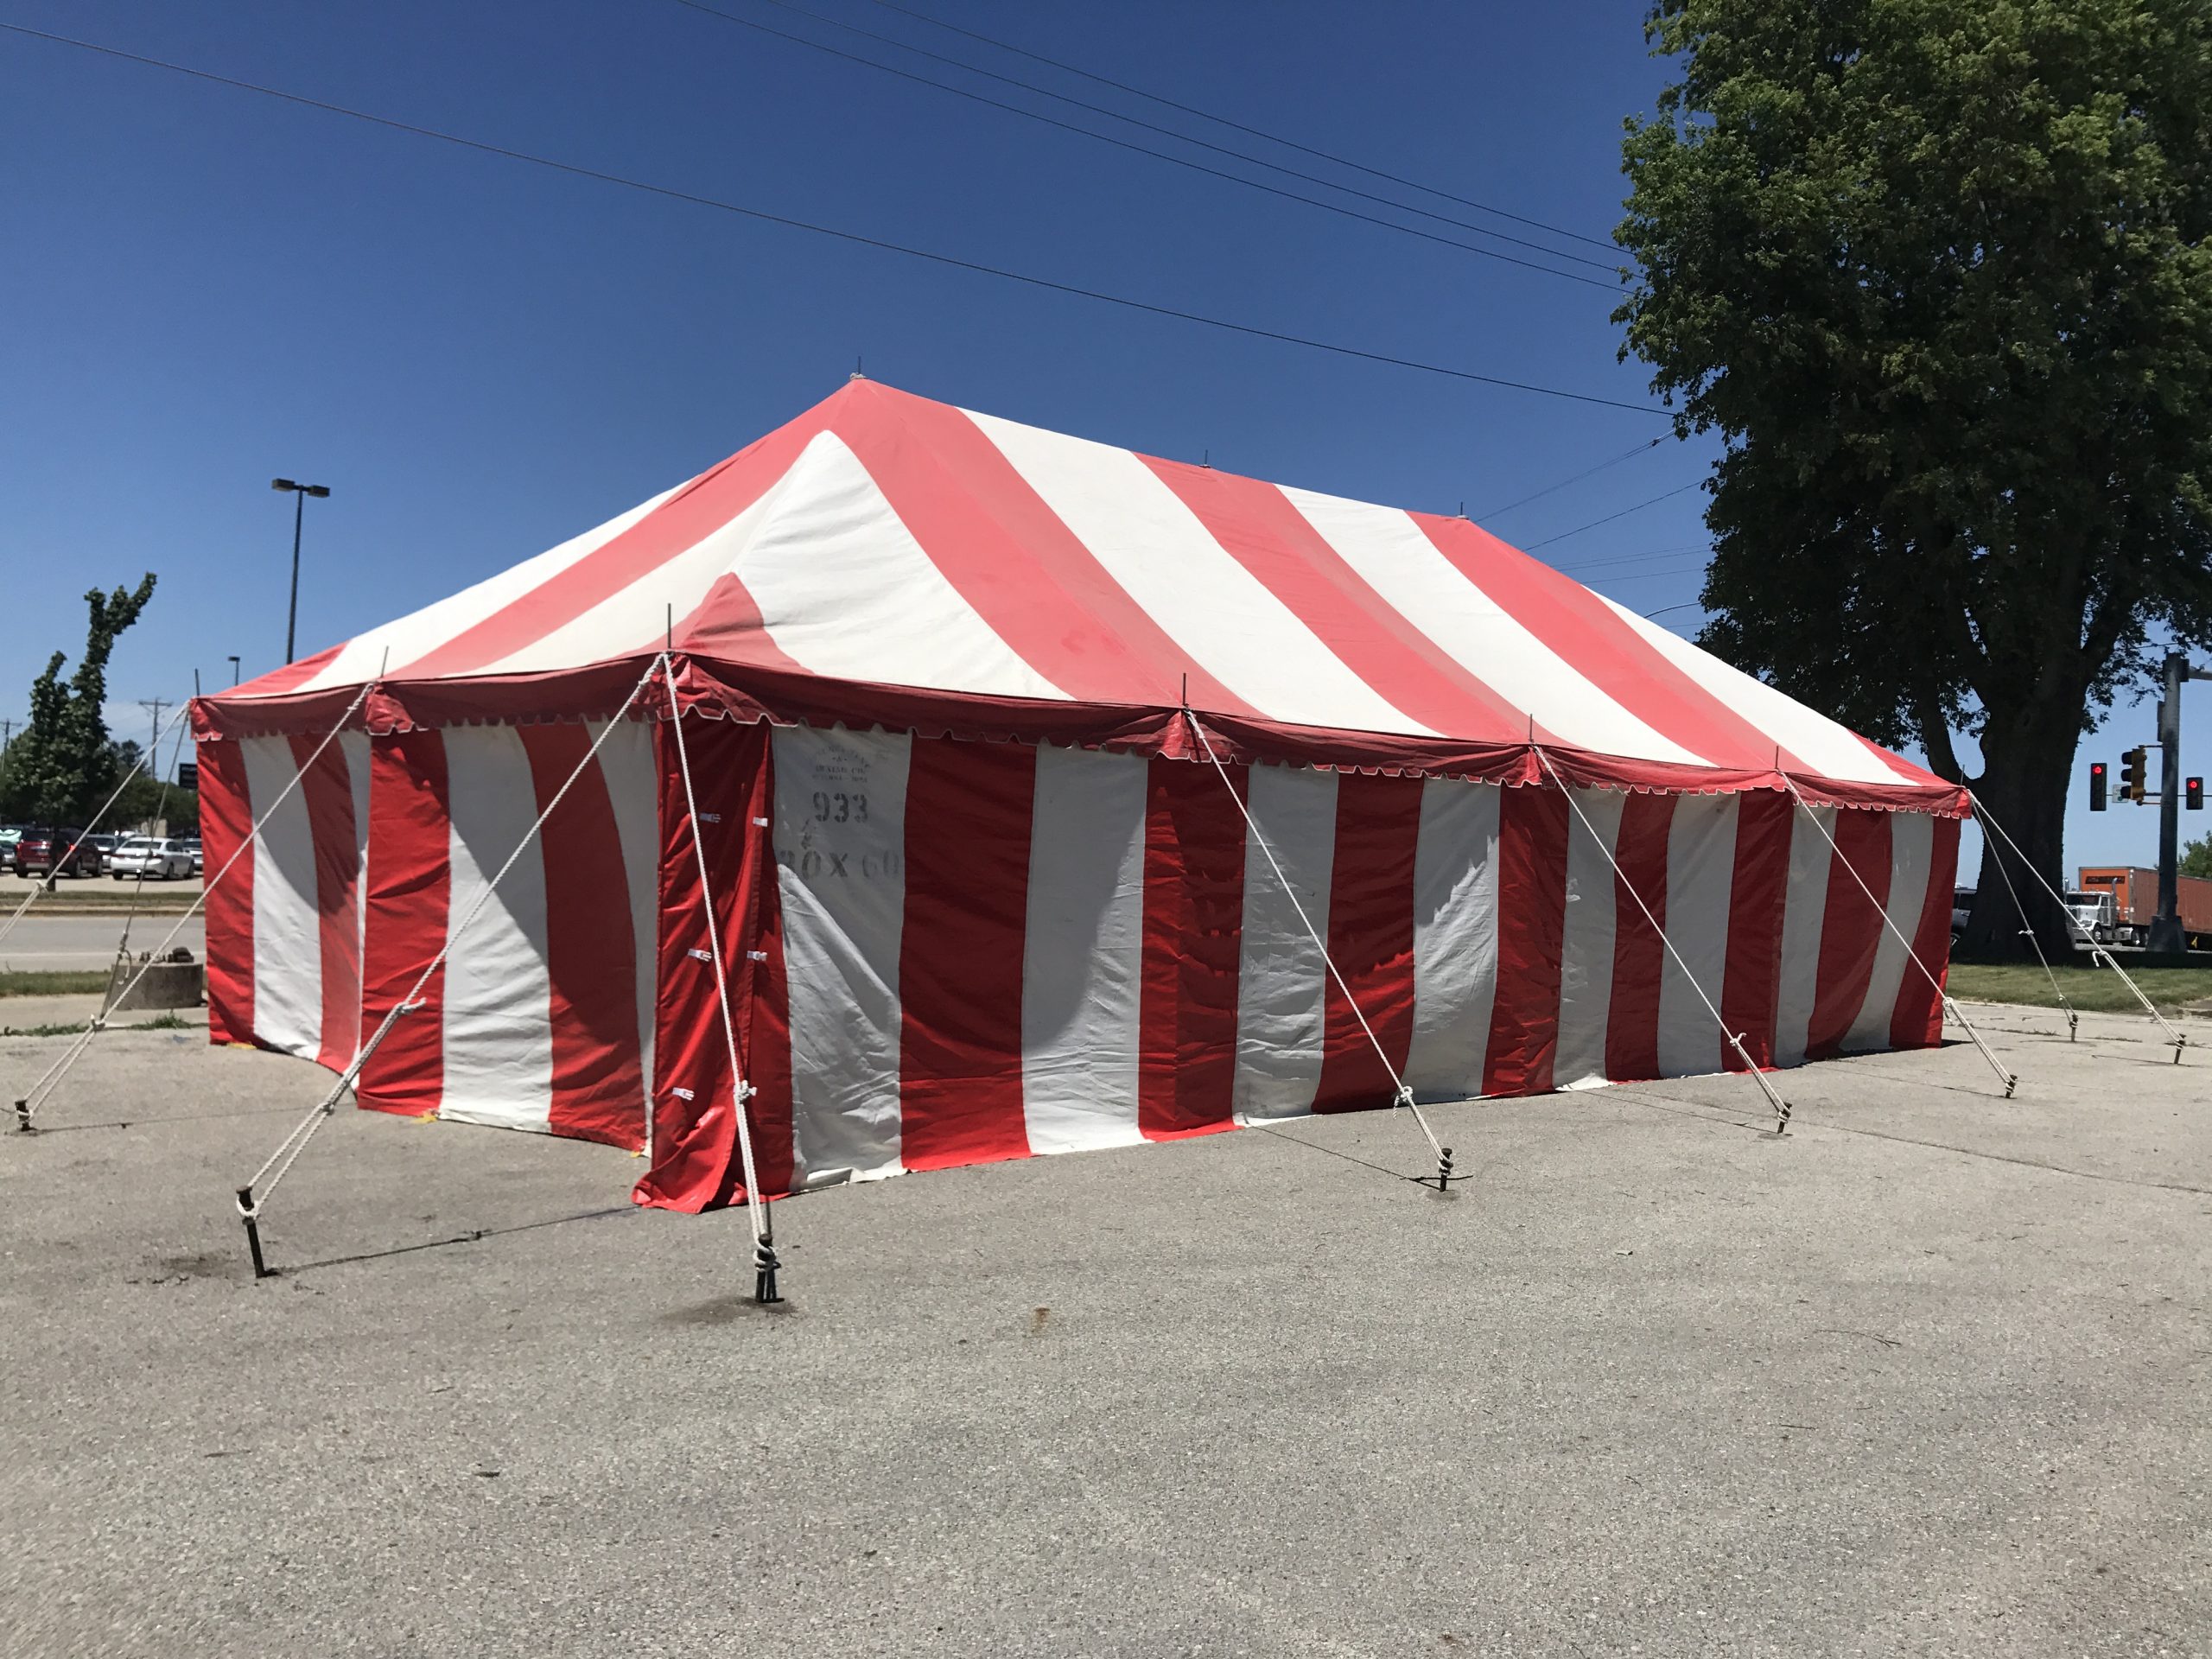 20' x 40' rope and pole Fireworks tent for Ka-Boomers Fireworks in Newton, Iowa